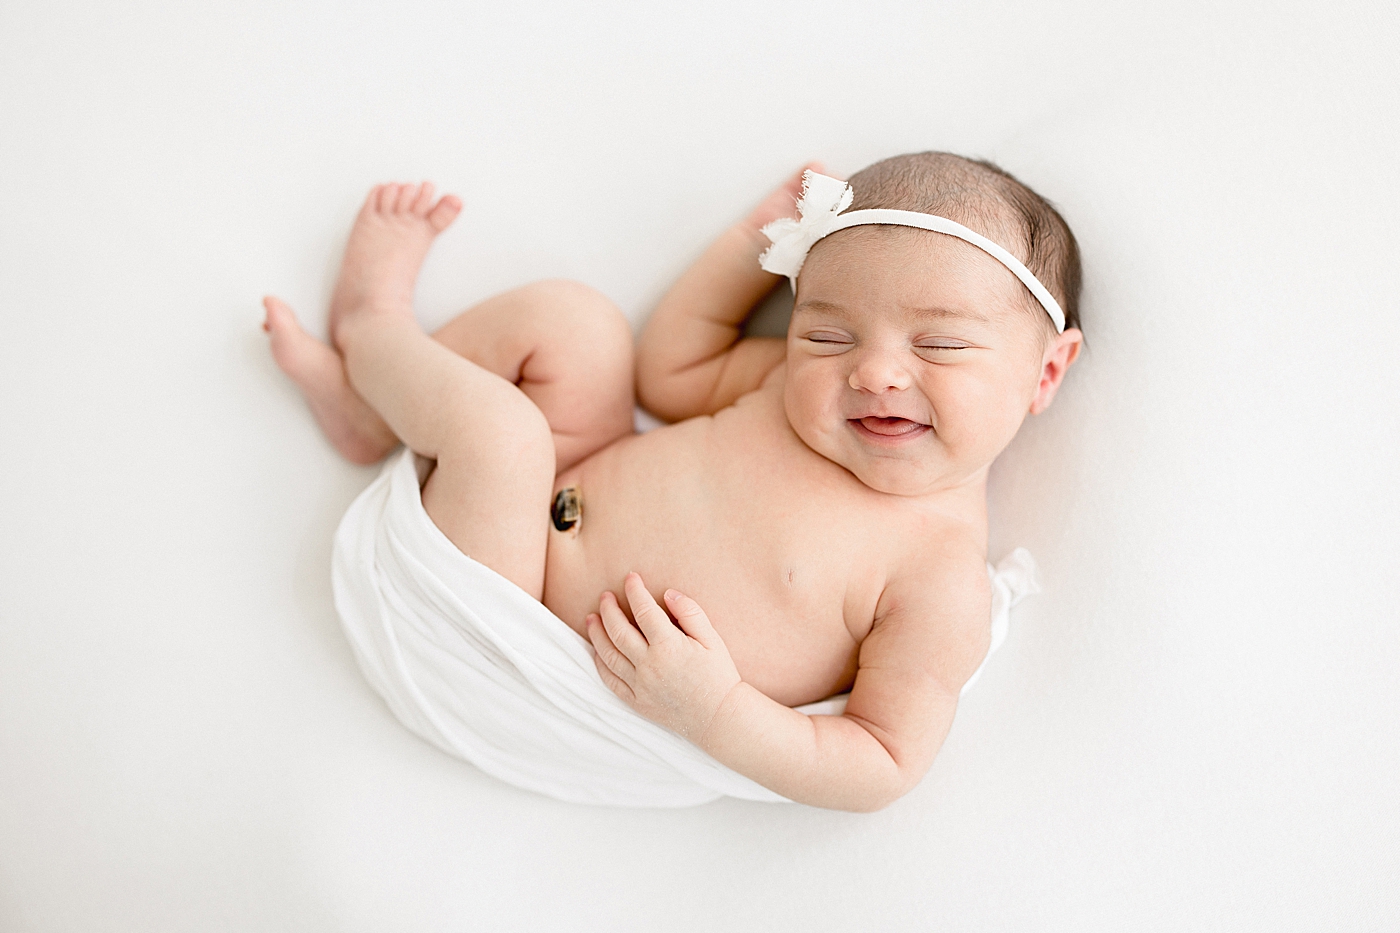 Newborn baby girl swaddled on her back and smiling. Photo by Brittany Elise Photography.